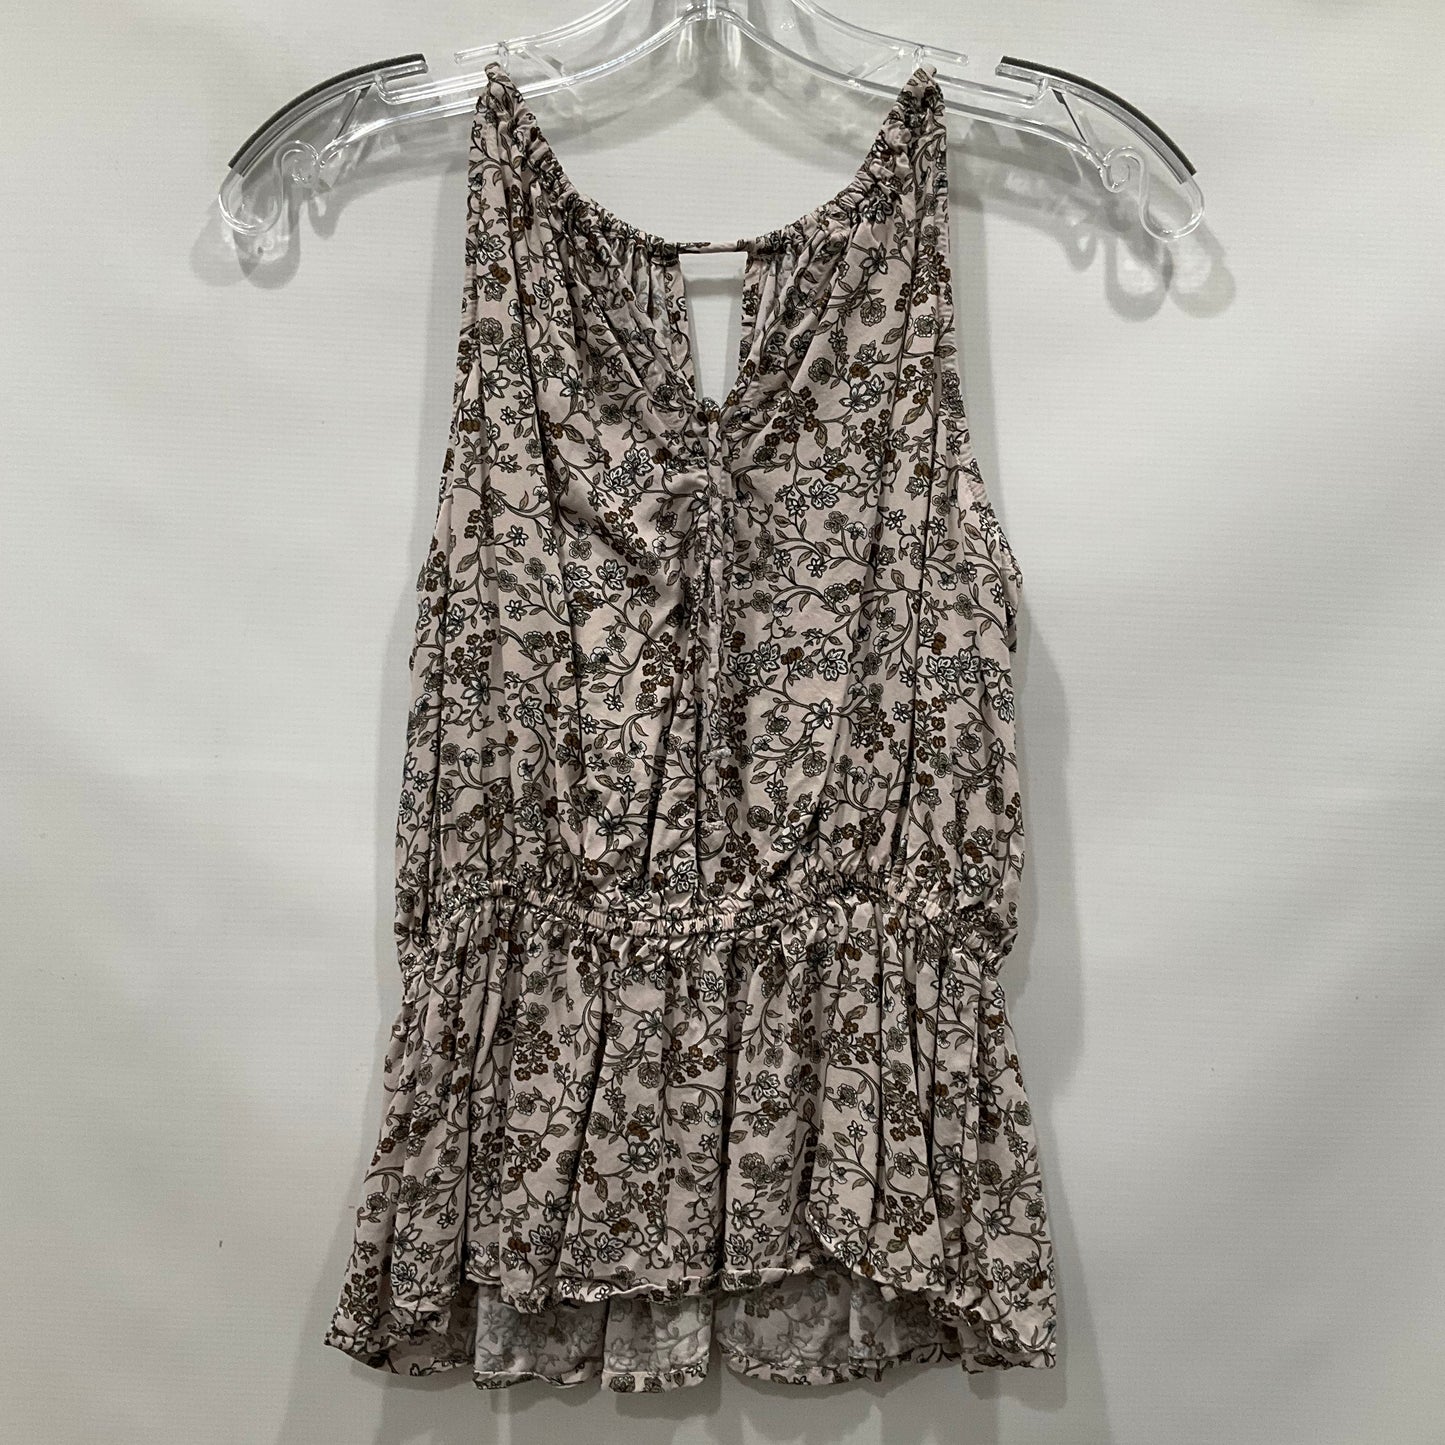 Flowered Top Sleeveless Old Navy, Size S